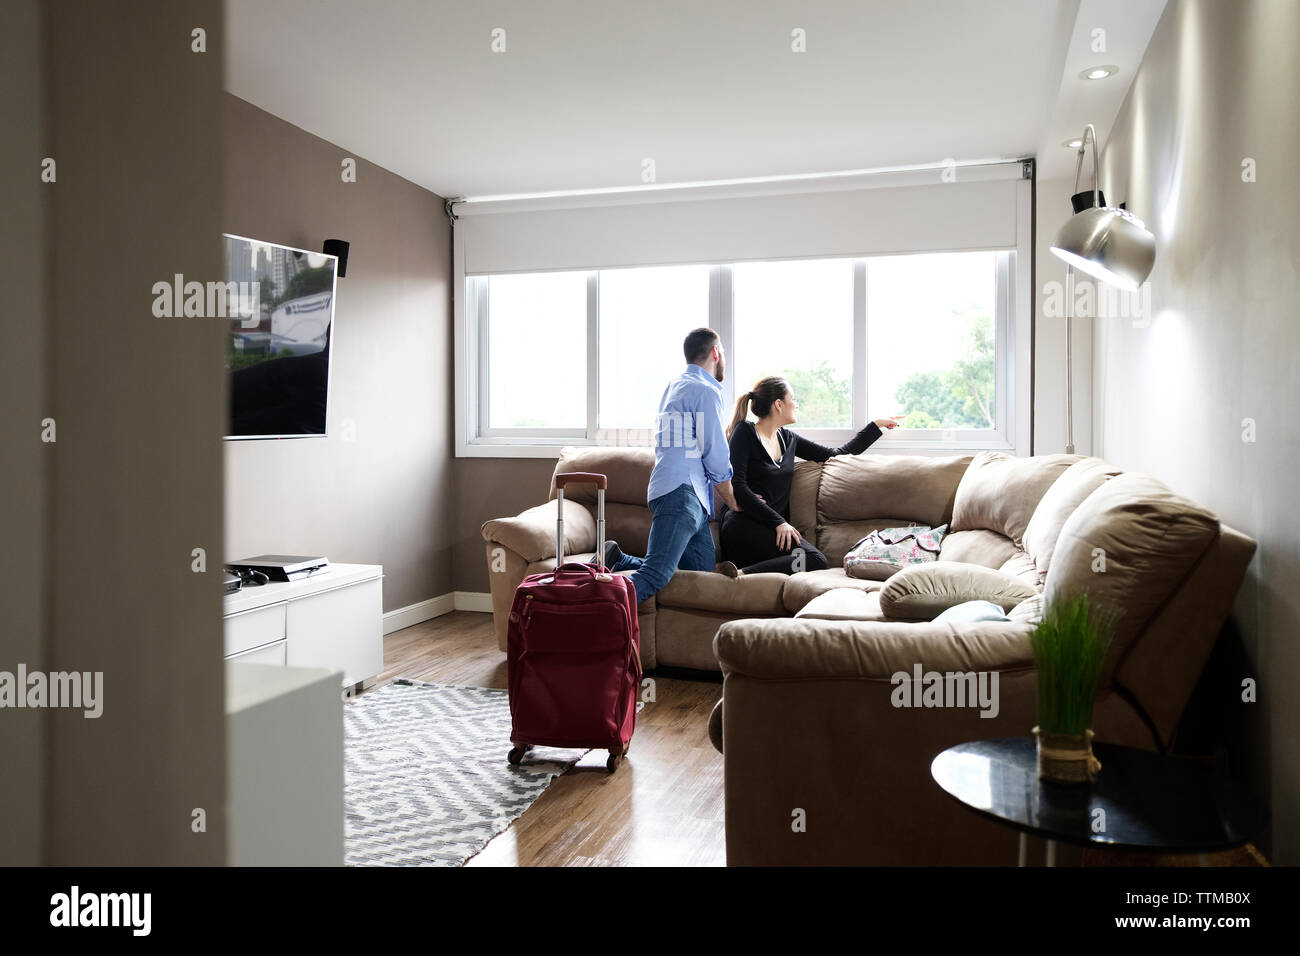 Young couple looking though window while kneeling on sofa in rental house Stock Photo